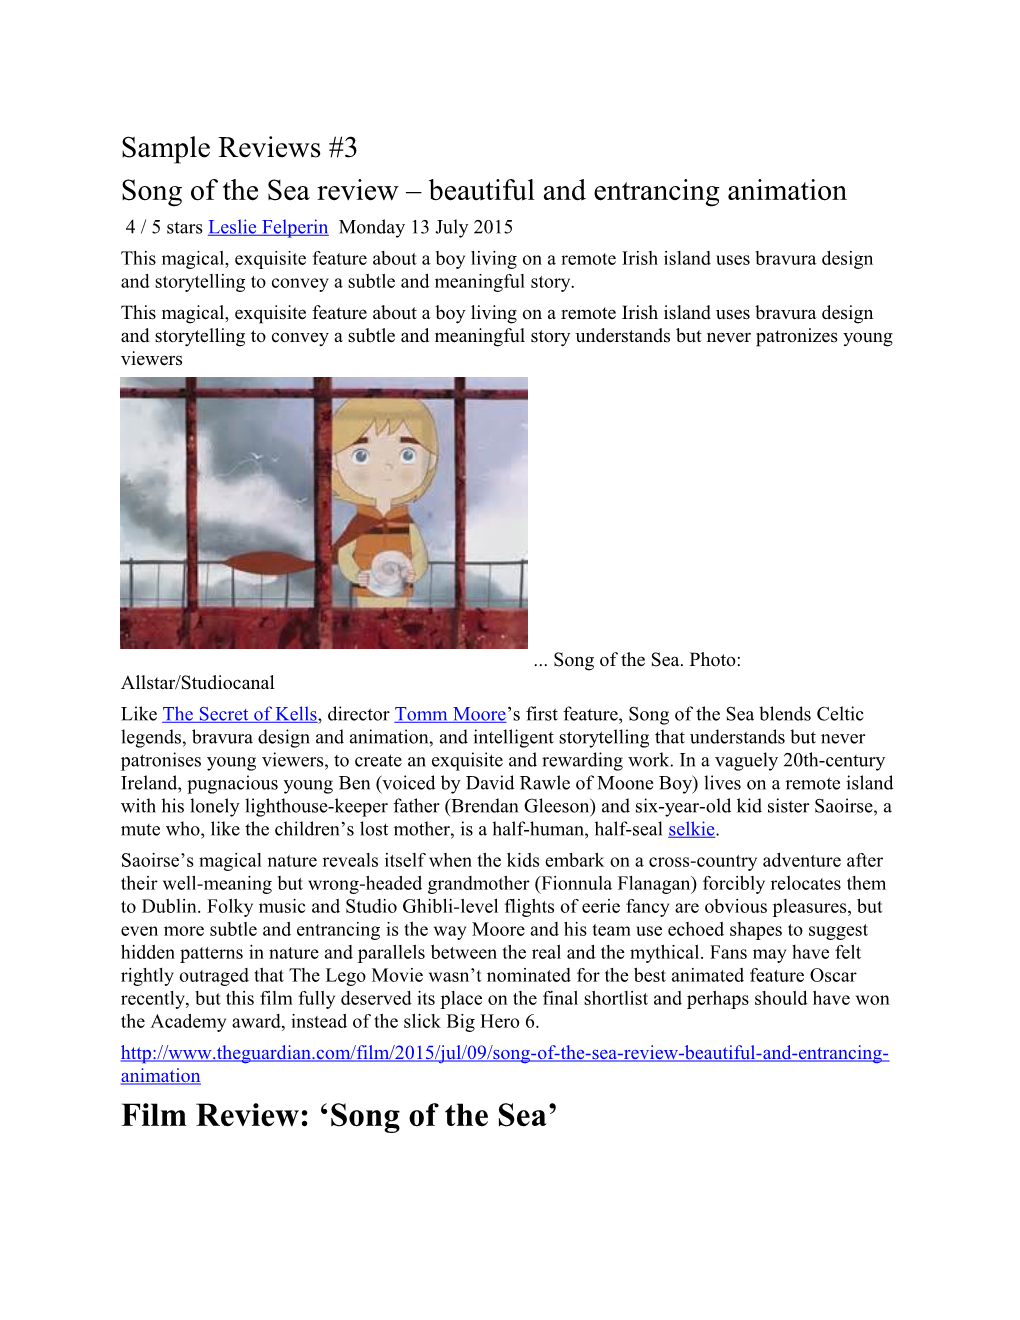 Song of the Sea Review Beautiful and Entrancing Animation